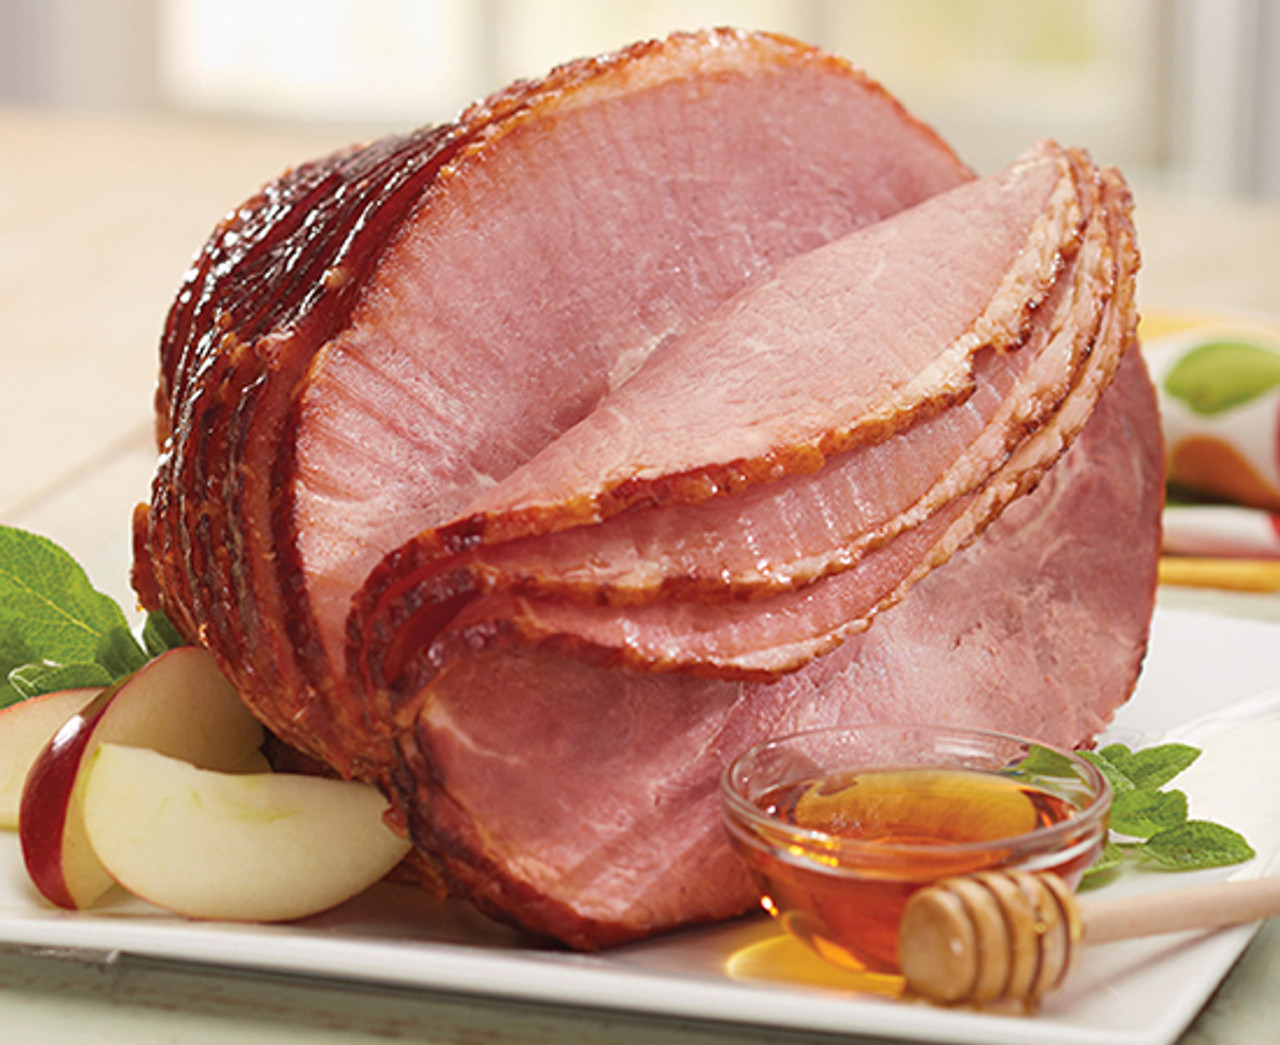 Smithfield Honey Cured And Honey Glazed Spiral Sliced Half Smoked Hamprice Includes Shipping